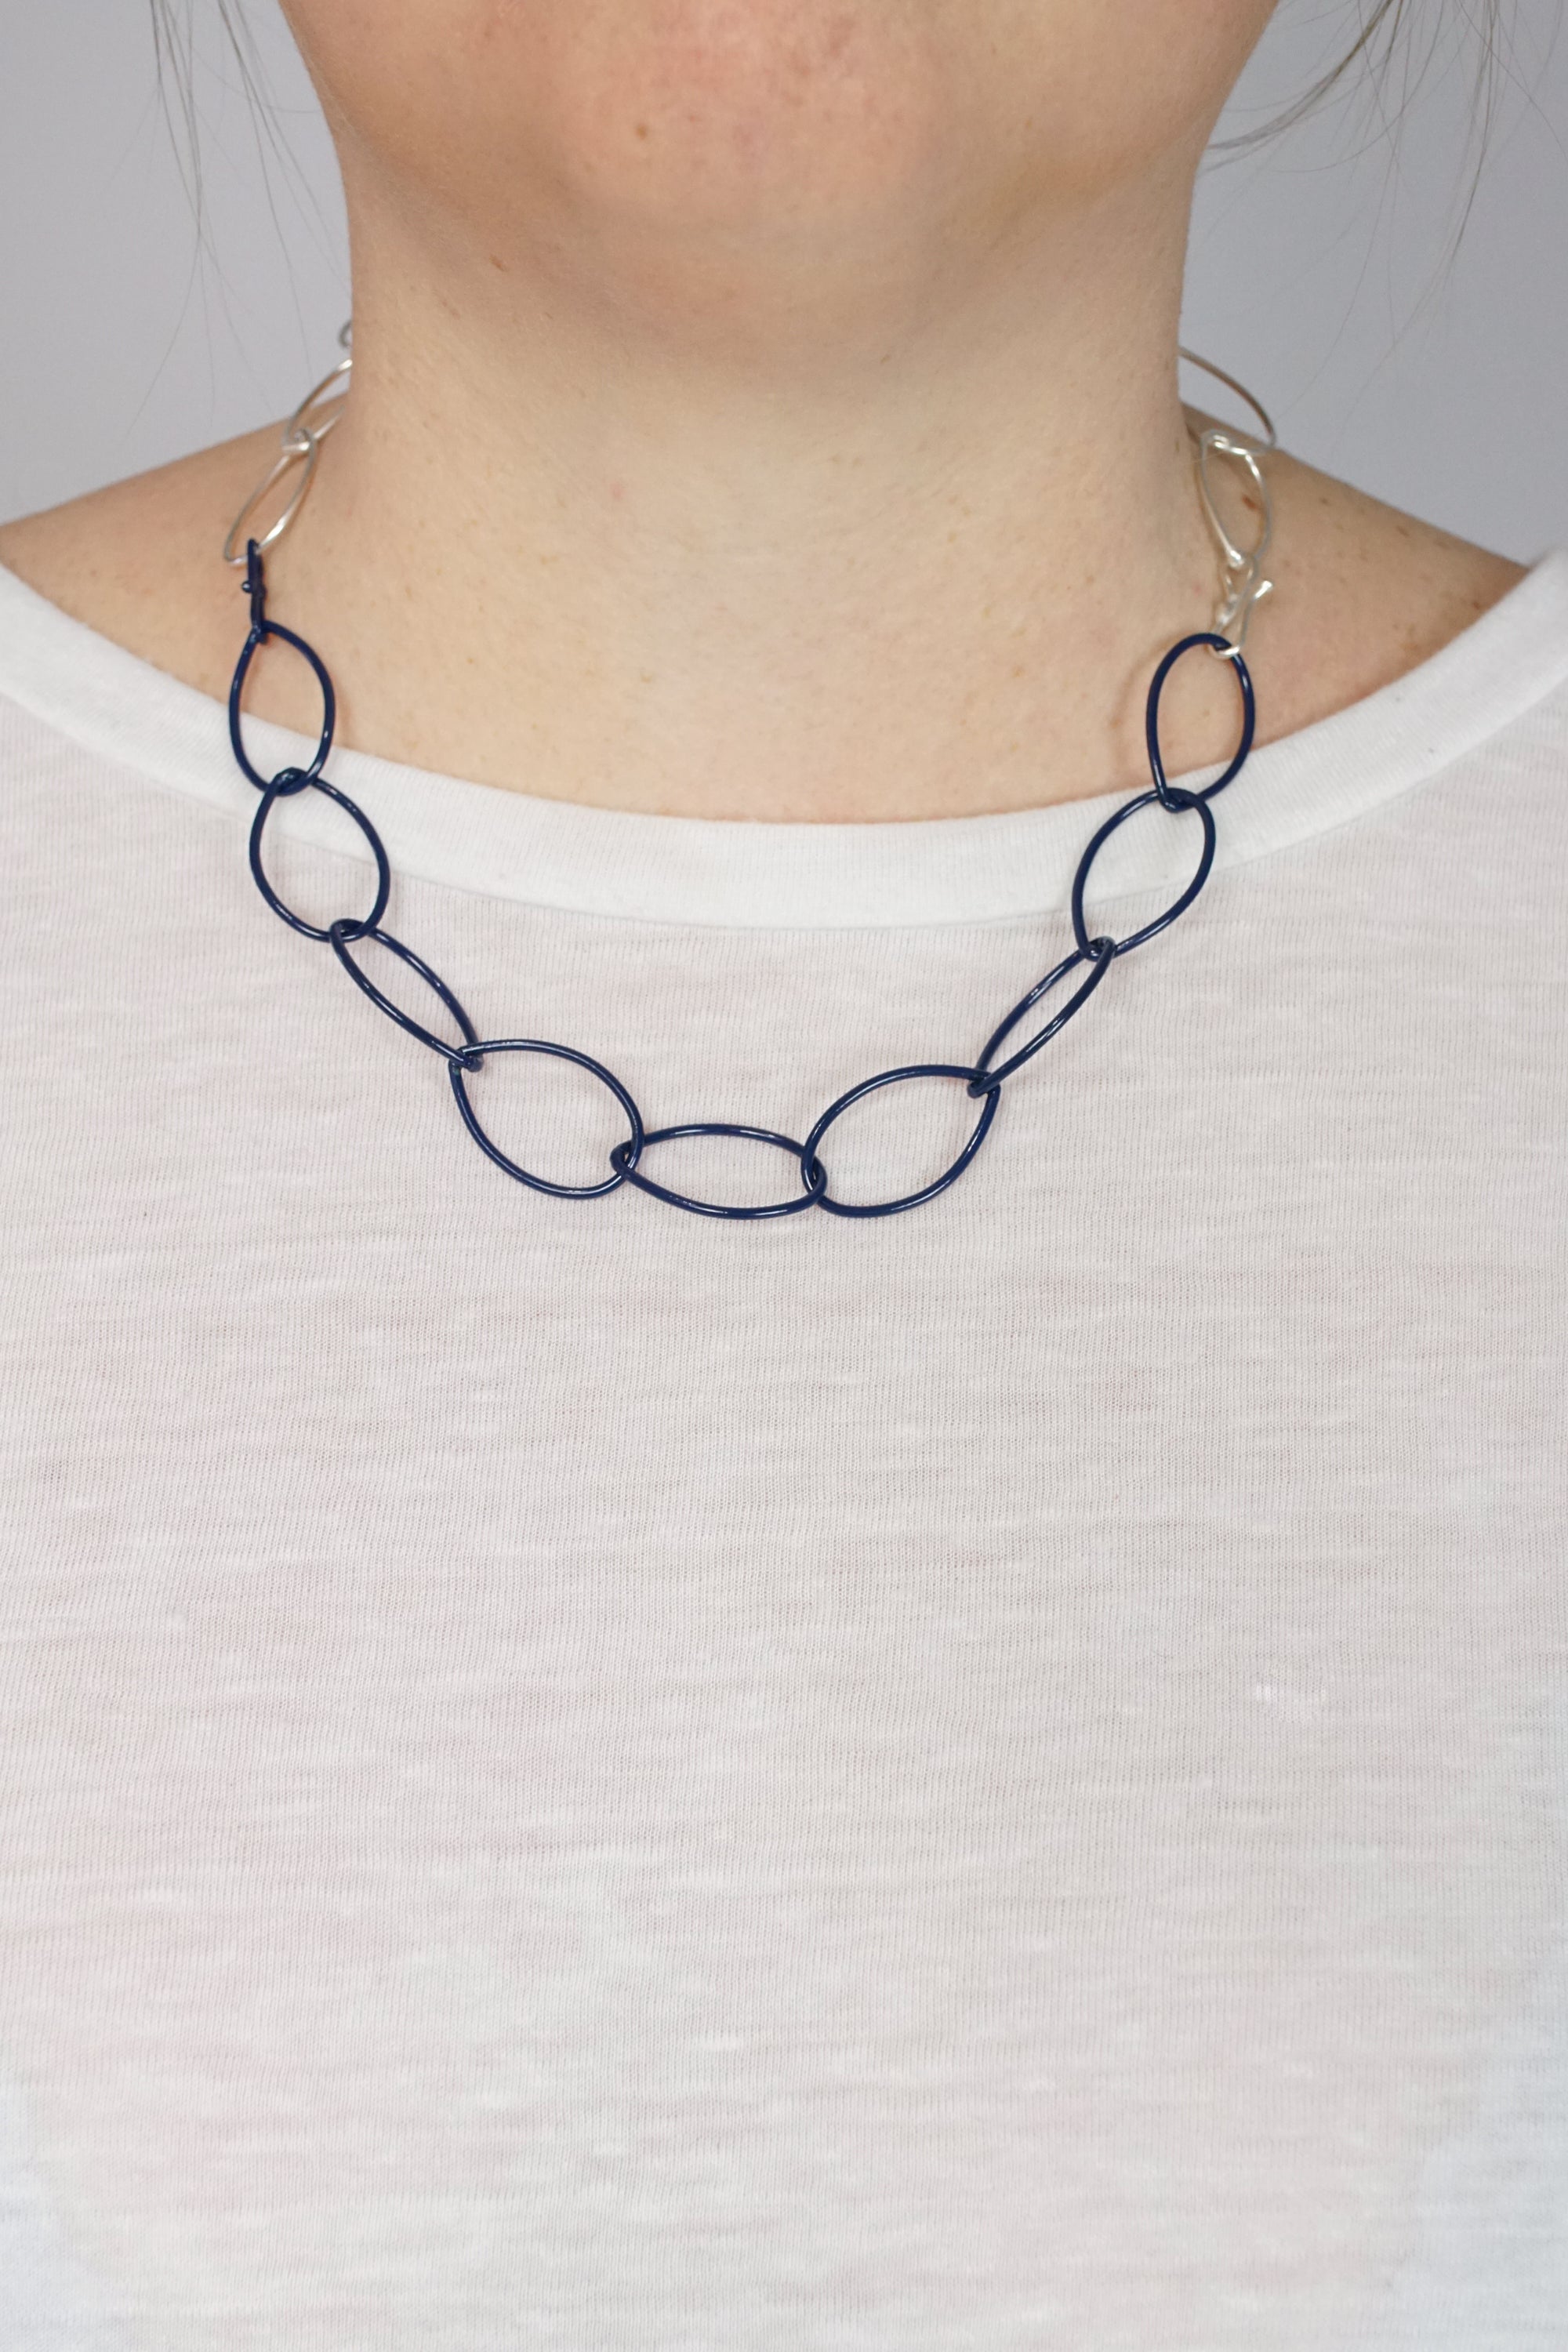 Audrey necklace in Silver and Blue Sapphire